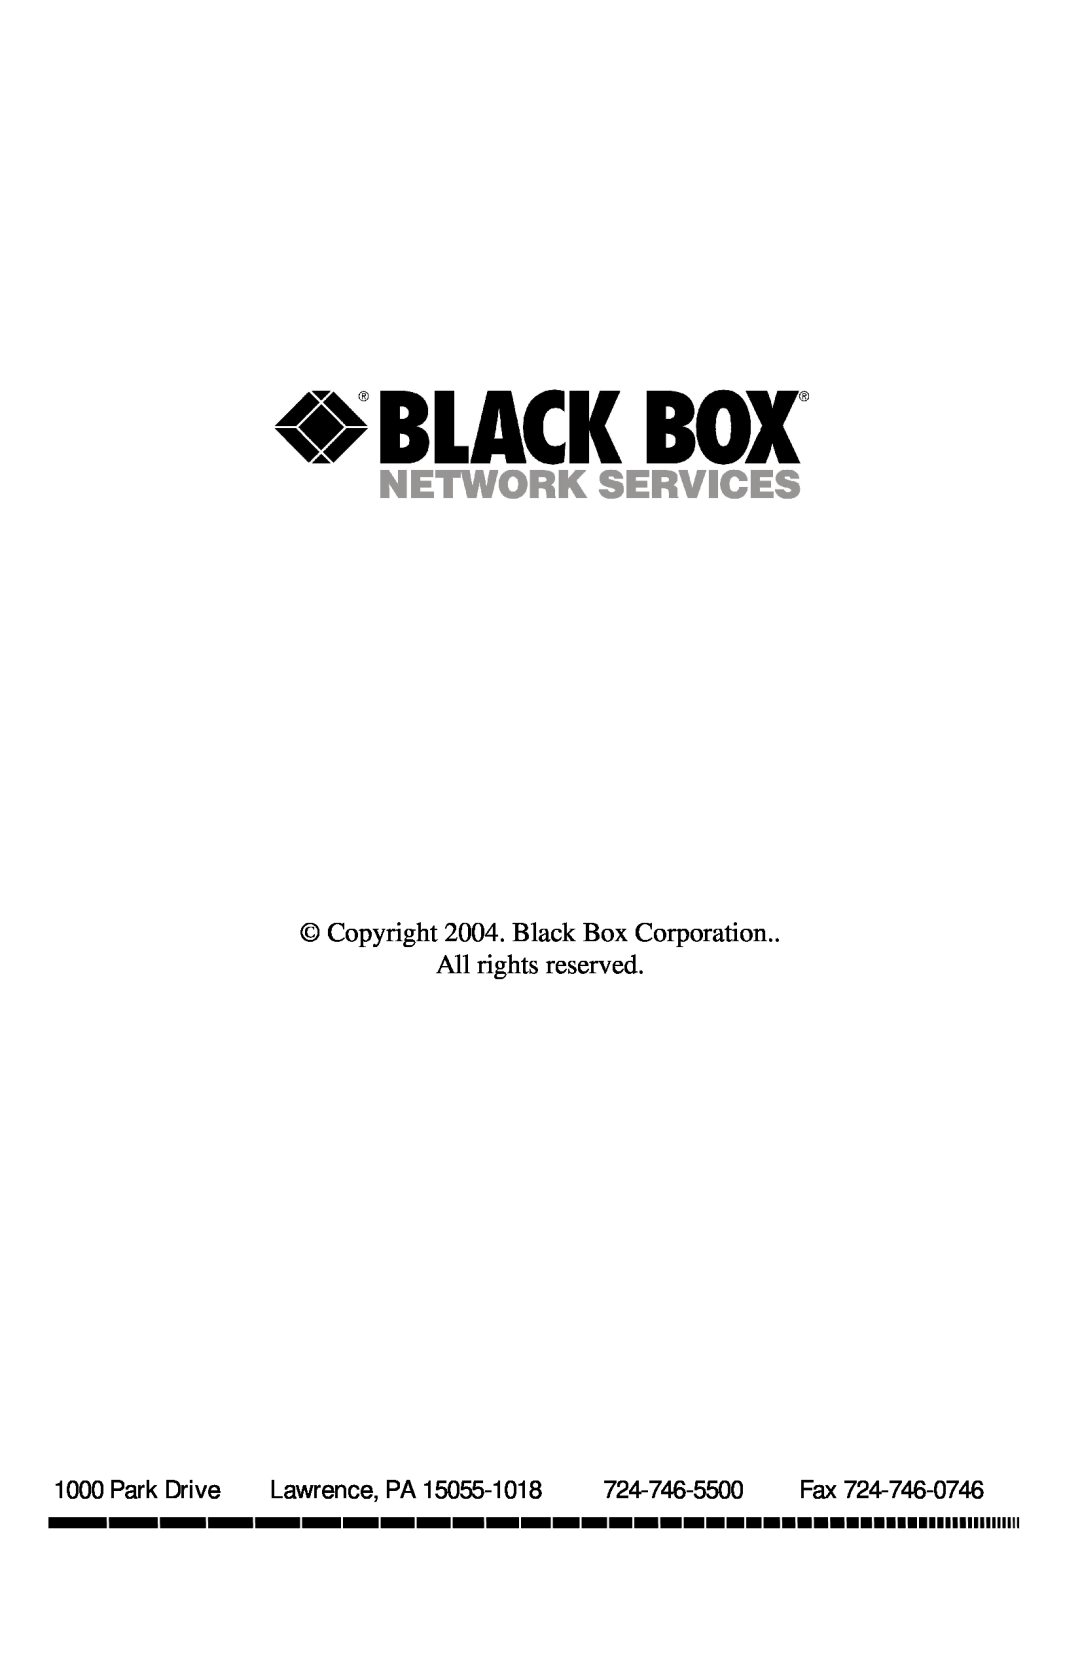 Black Box Mini-CAT5 Video-over-CAT5 Extension manual Copyright 2004. Black Box Corporation, All rights reserved, Park Drive 